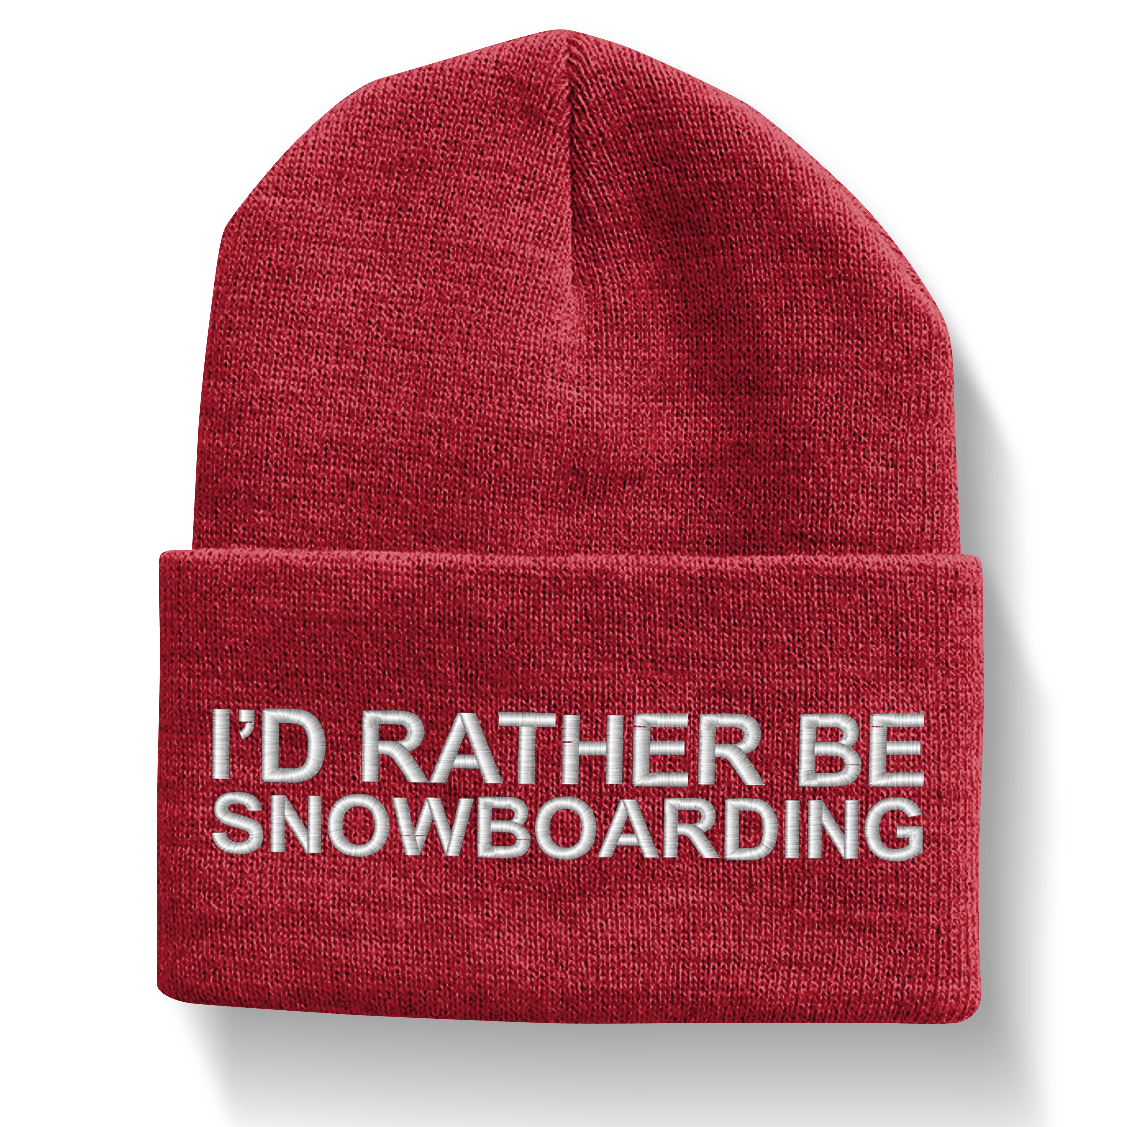 I'd Rather Be Snowboarding Beanie